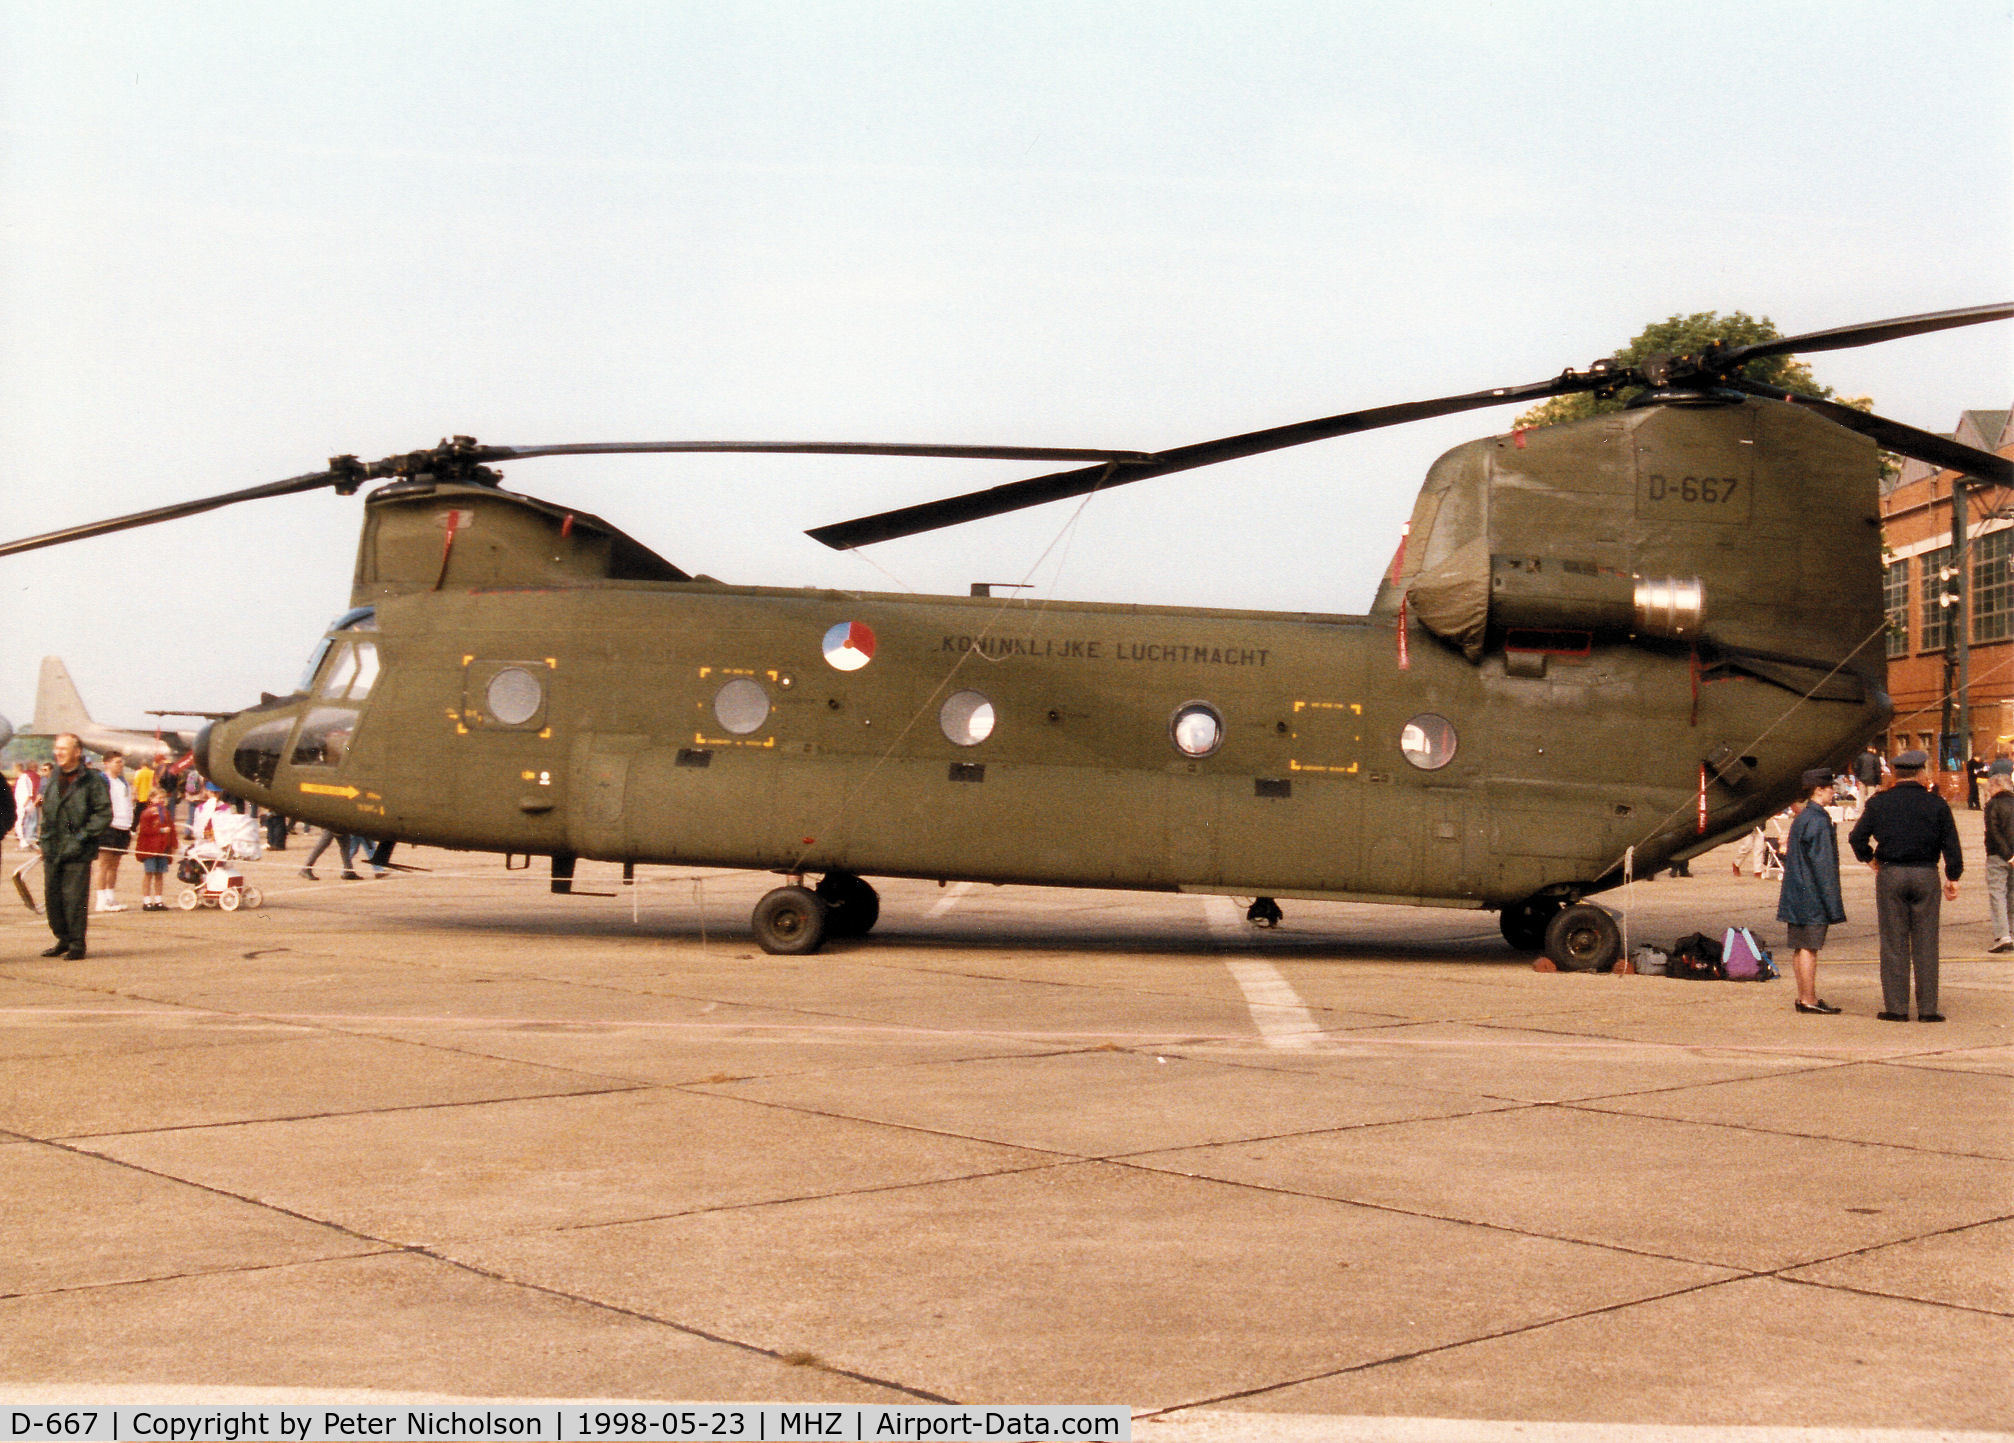 D-667, Boeing CH-47D Chinook C/N M.3667/NL-007, CH-47D Chinook of 298 Squadron Royal Netherlands Air Force on display at the 1998 RAF Mildenhall Air Fete.